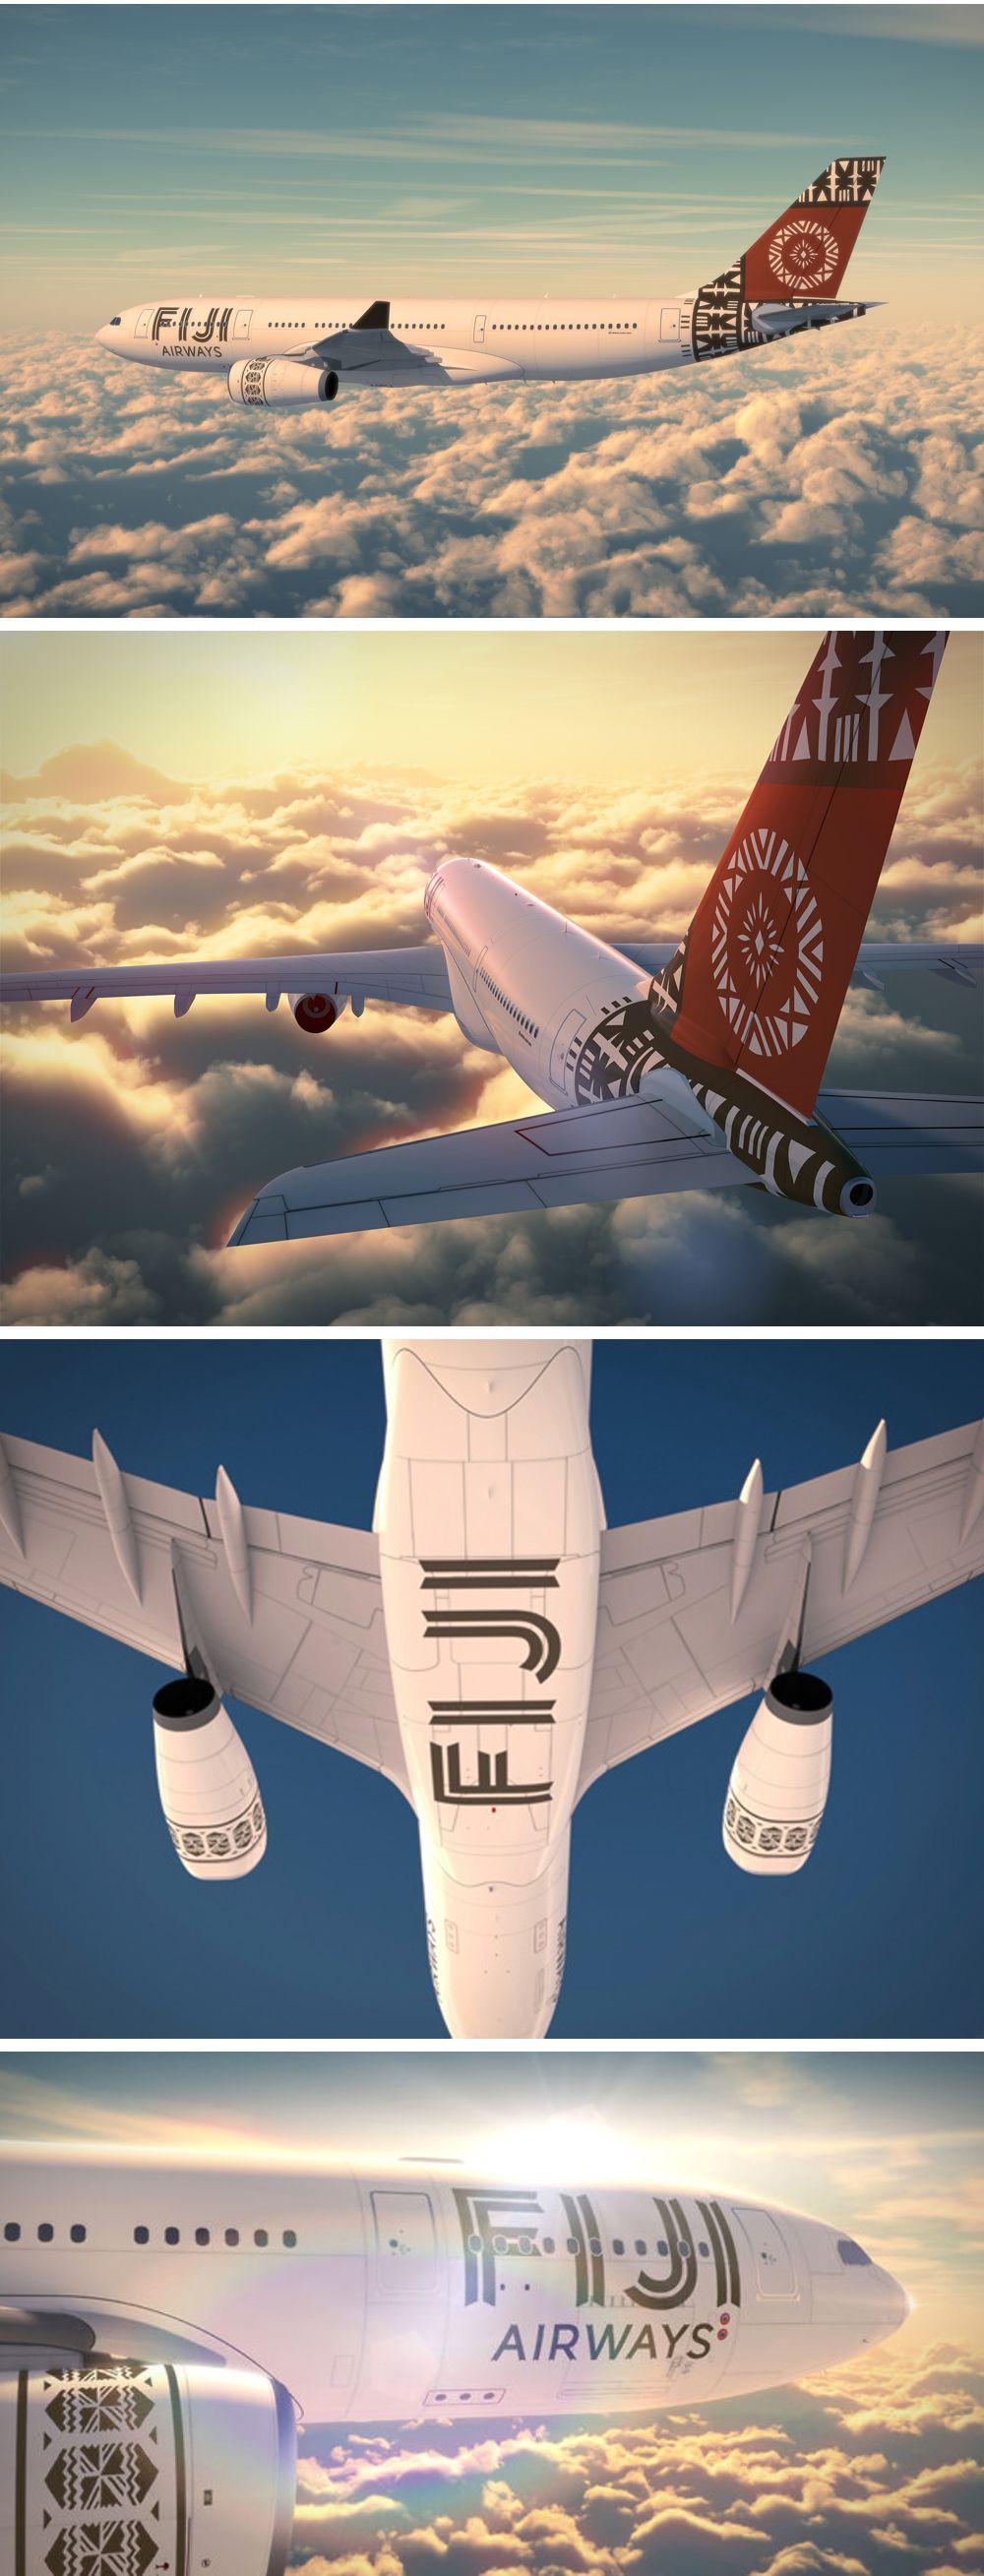 Fiji Airlines Company Logo - Fiji Airways on Behance ~Taste of Paradise | Up, up and away ...